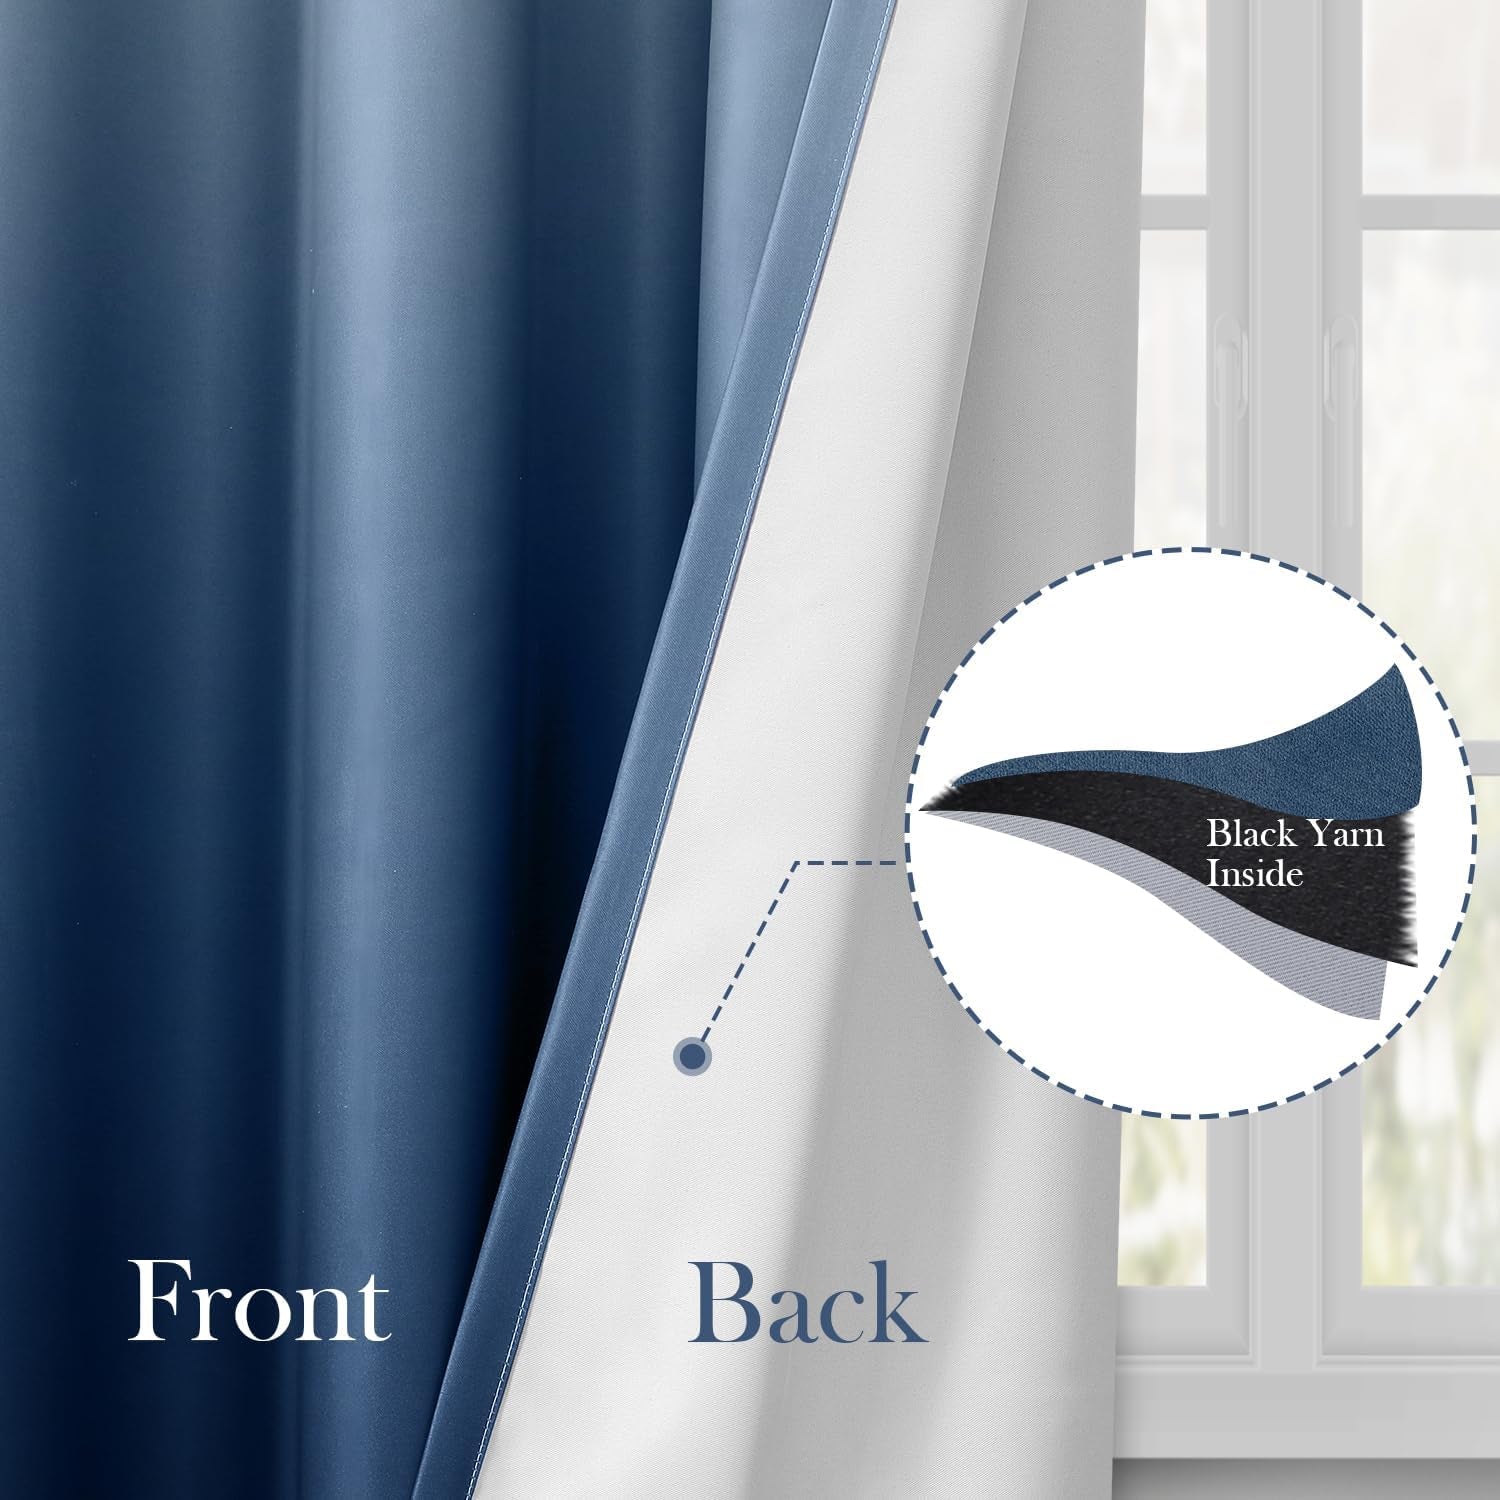 HOMEIDEAS Navy Blue Ombre Blackout Curtains 52 X 84 Inch Length Gradient Room Darkening Thermal Insulated Energy Saving Grommet 2 Panels Window Drapes for Living Room/Bedroom  HOMEIDEAS   